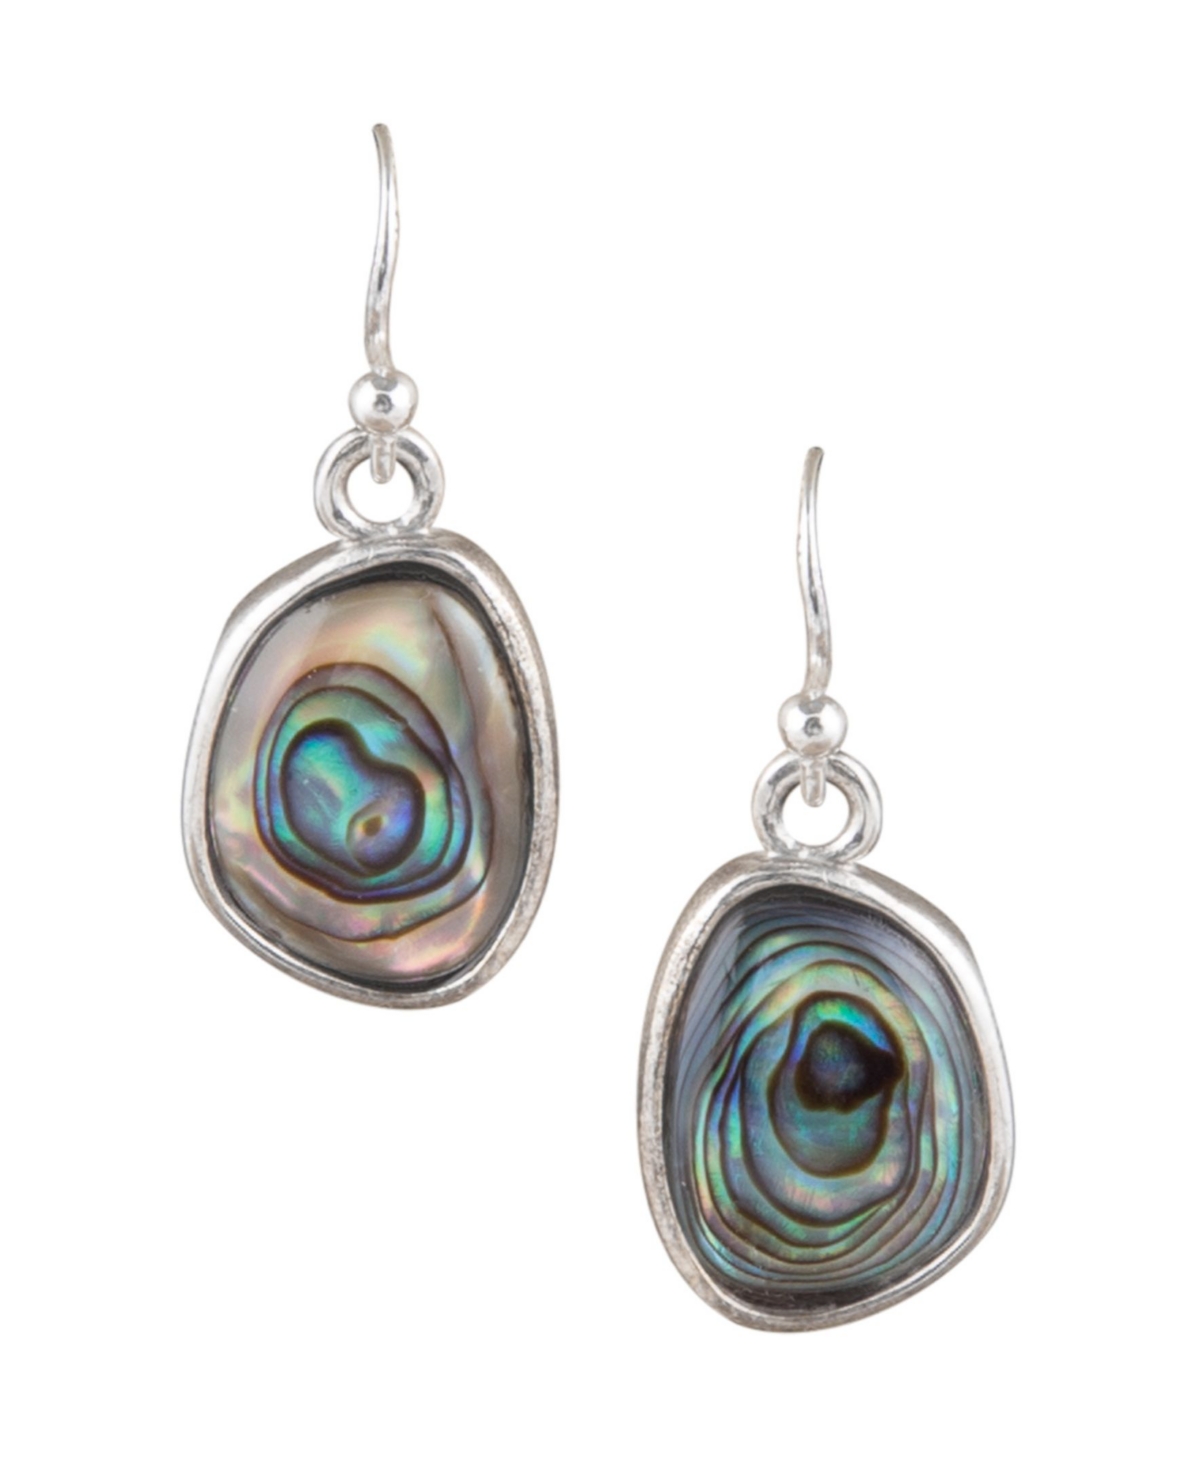 Women's Lush Sterling Silver and Abalone Shell Drop Earrings - Abalone